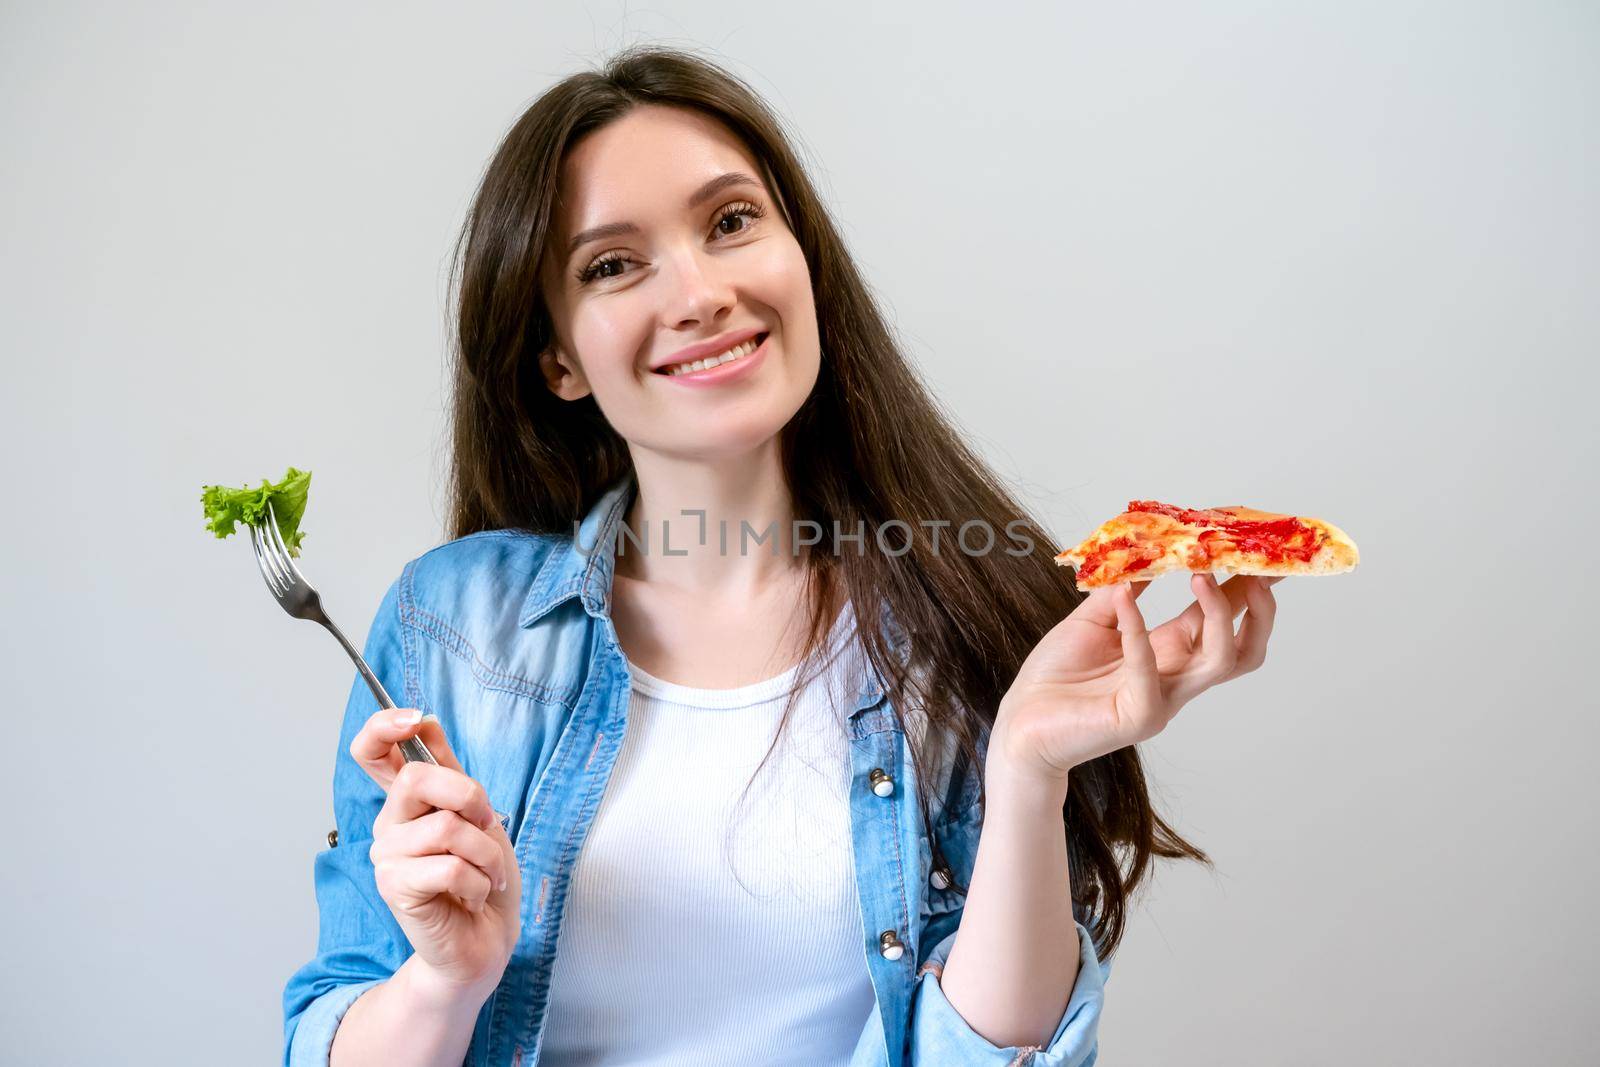 Young smiling woman chooses what to eat, pizza or salad.